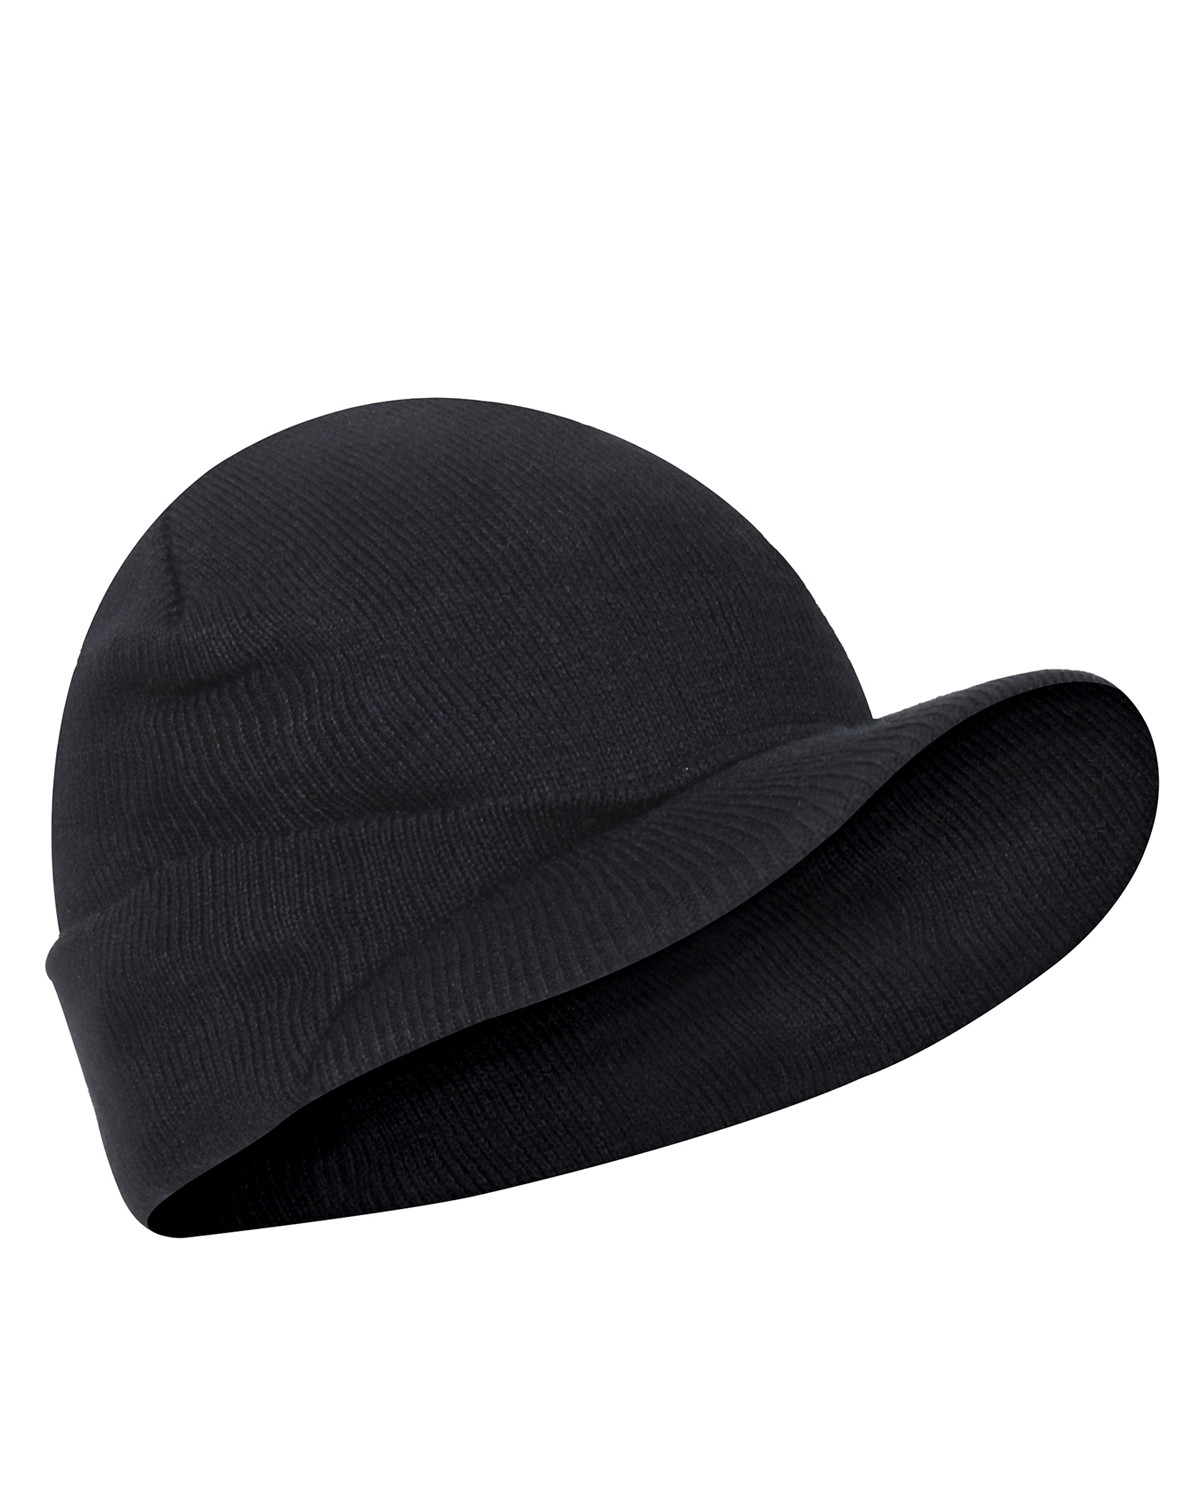 Rothco Deluxe Jeep Cap (Sort, One Size)